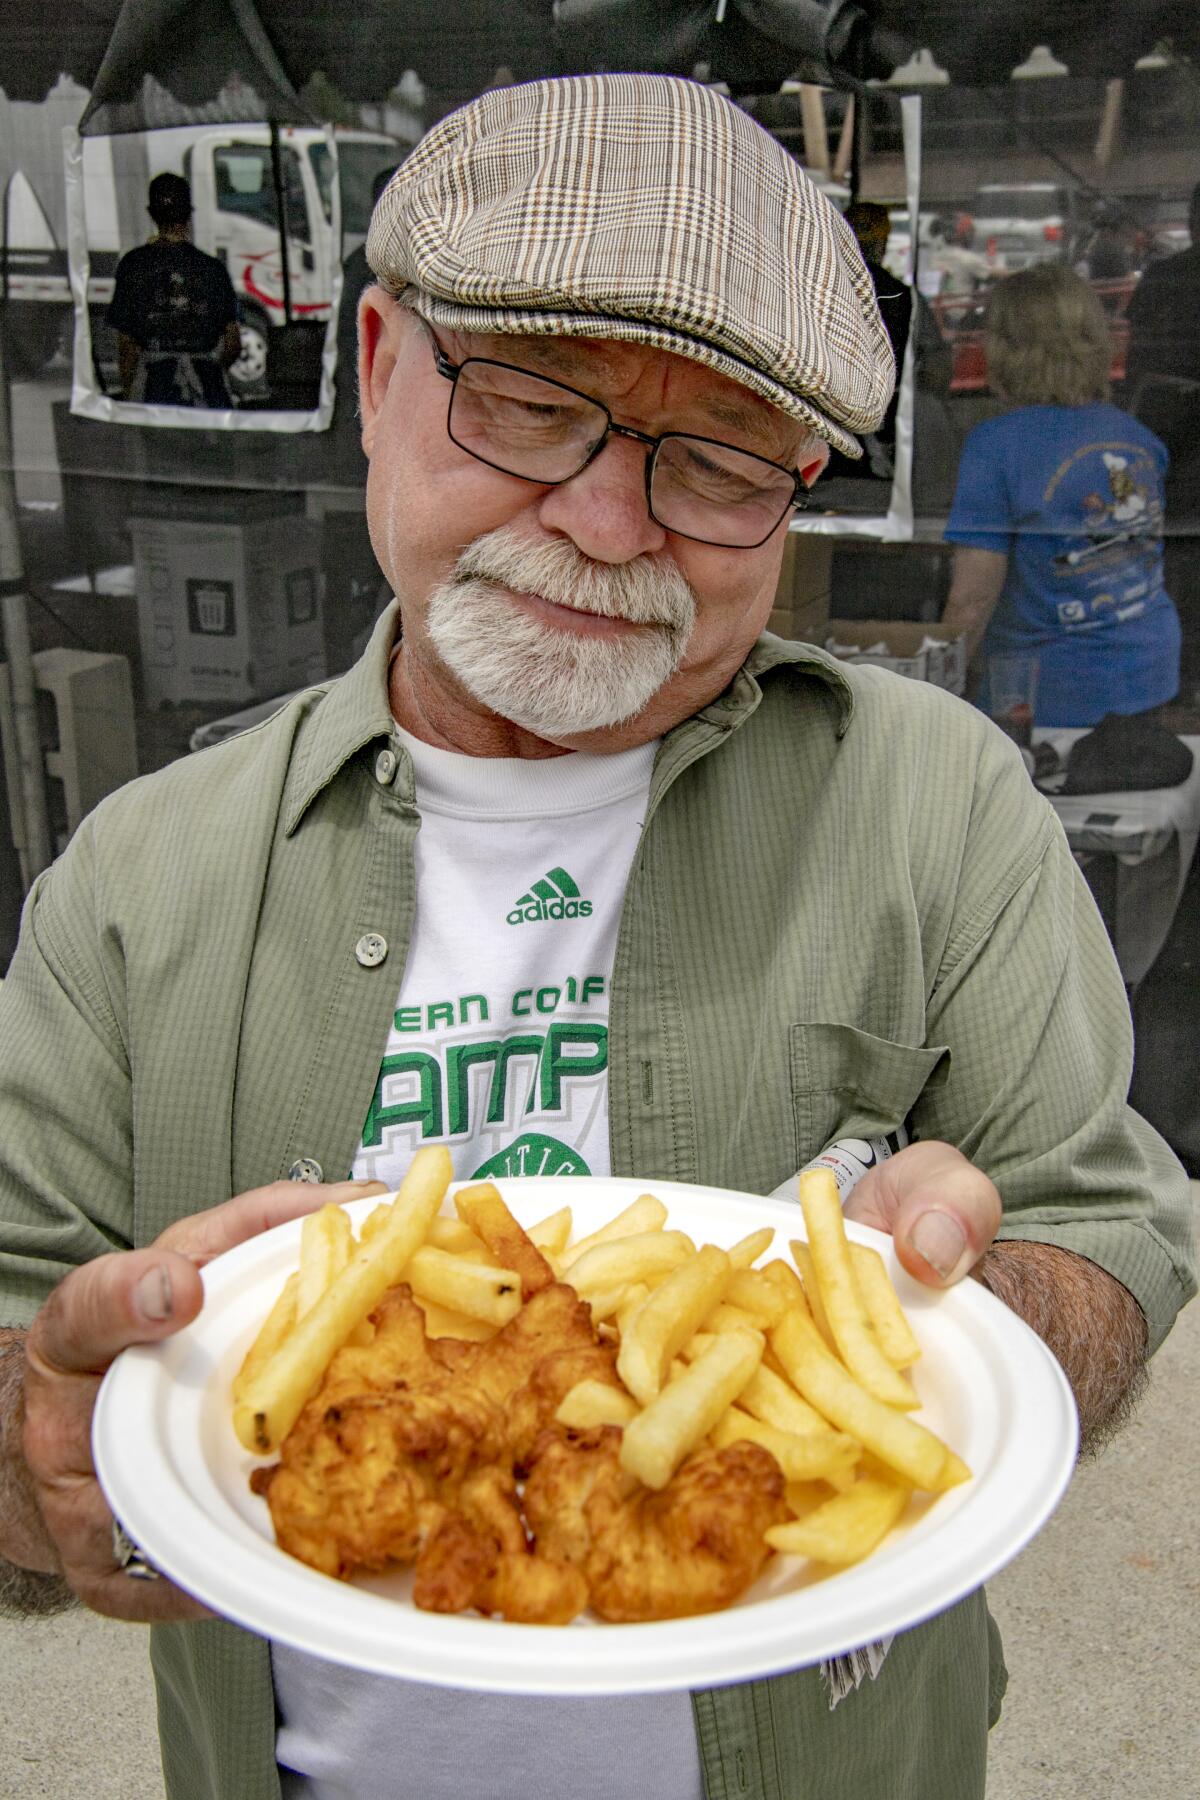 A quizzical Ron Morse contemplates his $15 fish dinner Saturday at the Fish Fry at Lions Park in Costa Mesa, June 4, 2022.